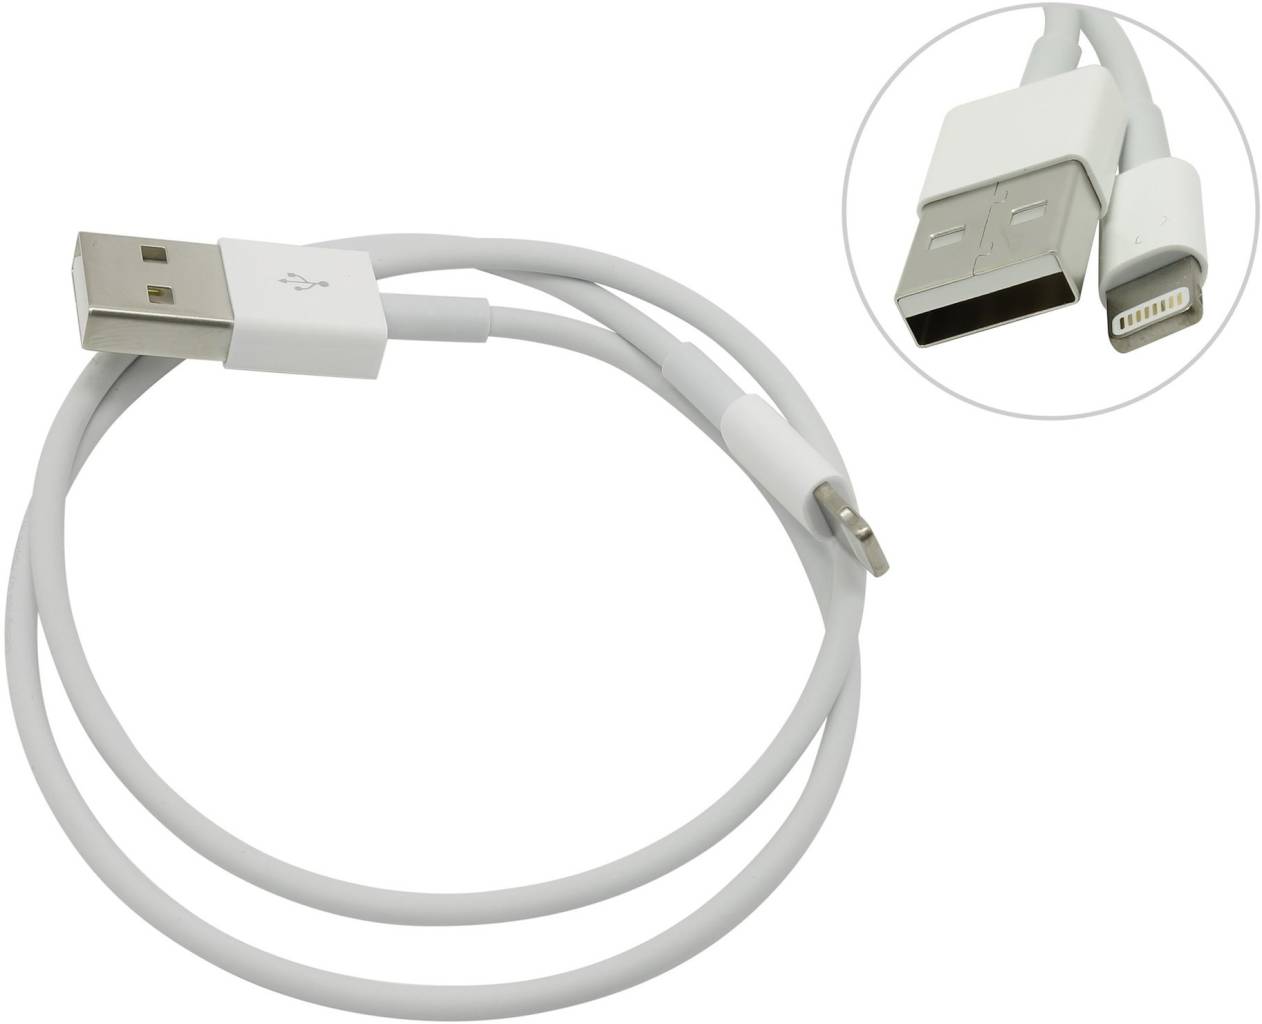   Apple [ME291ZM/A] Lightning to USB Cable 0.5